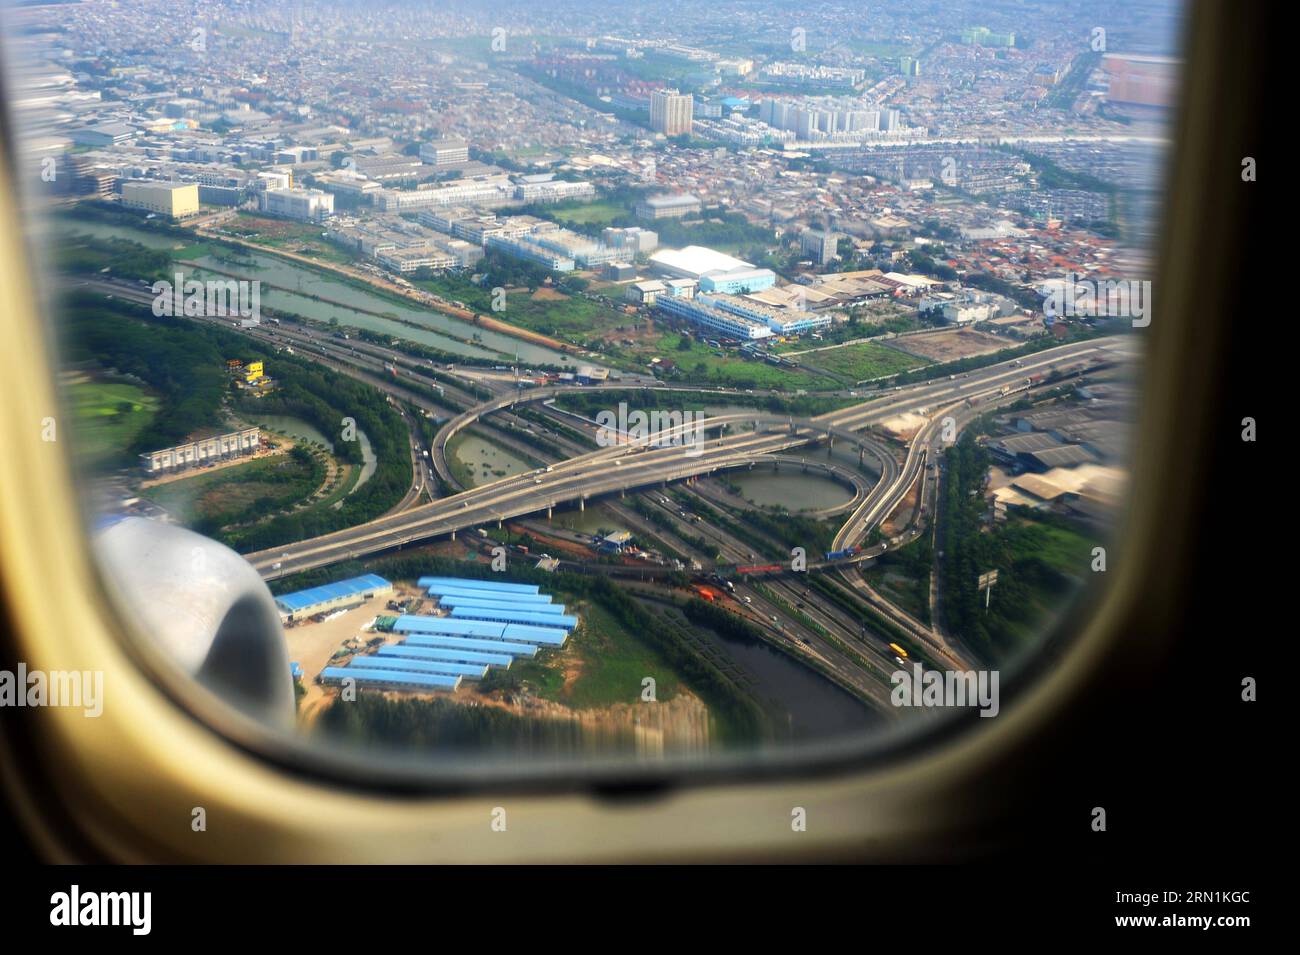 (150107) -- JAKARTA, Jan. 7, 2015 -- Photo taken on Jan. 7, 2015 from a window of a commercial flight shows an aerial view of the north Jakarta coast in Jakarta, Indonesia. )(hy) INDONESIA-JAKARTA-AERIAL VIEW AgungxKuncahyaxB. PUBLICATIONxNOTxINxCHN   Jakarta Jan 7 2015 Photo Taken ON Jan 7 2015 from a Window of a Commercial Flight Shows to Aerial View of The North Jakarta Coast in Jakarta Indonesia Hy Indonesia Jakarta Aerial View  PUBLICATIONxNOTxINxCHN Stock Photo